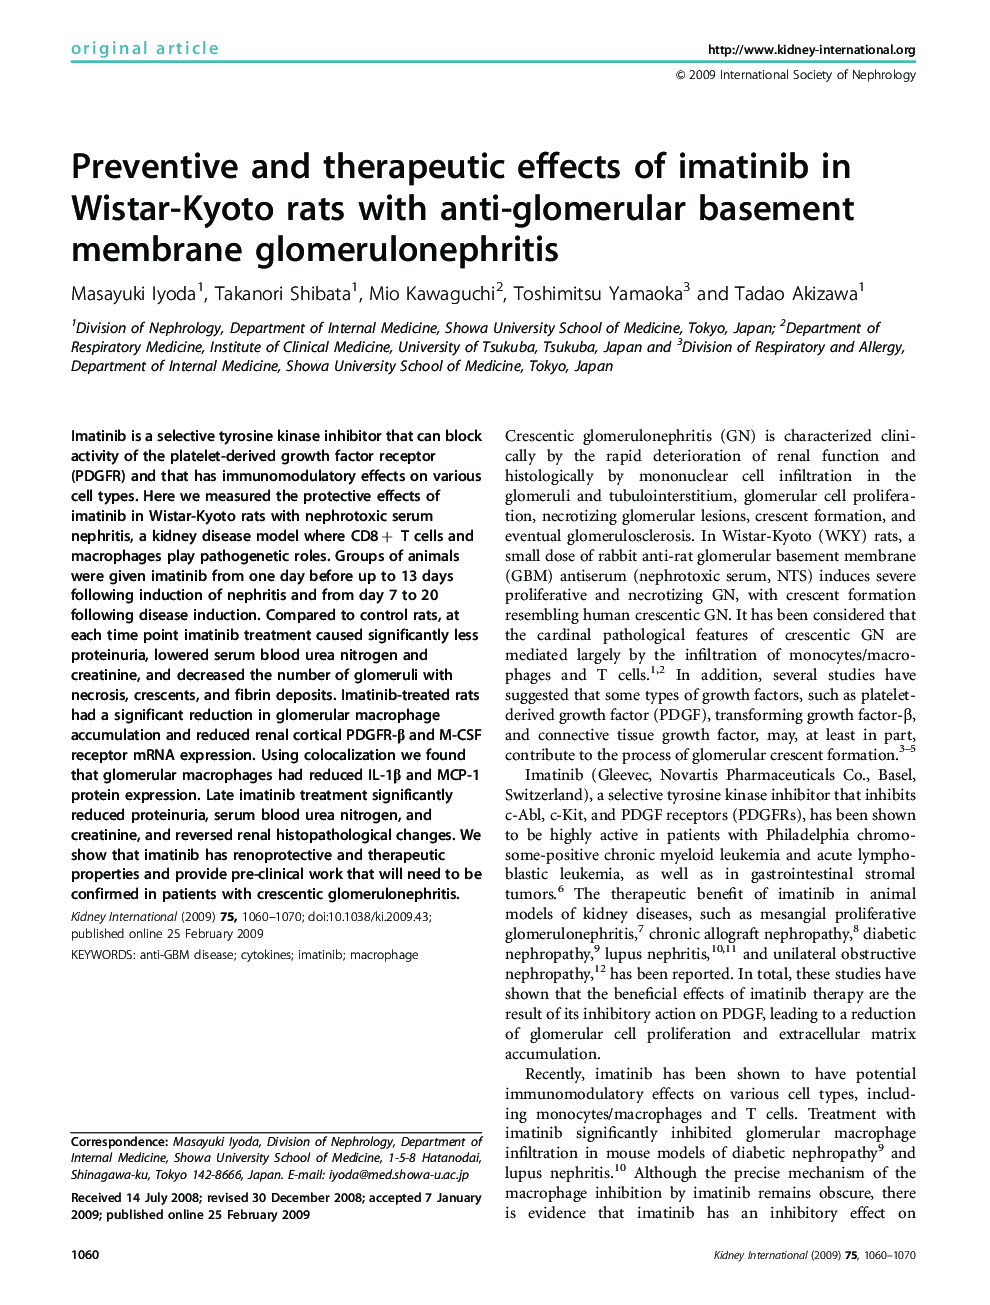 Preventive and therapeutic effects of imatinib in Wistar-Kyoto rats with anti-glomerular basement membrane glomerulonephritis 